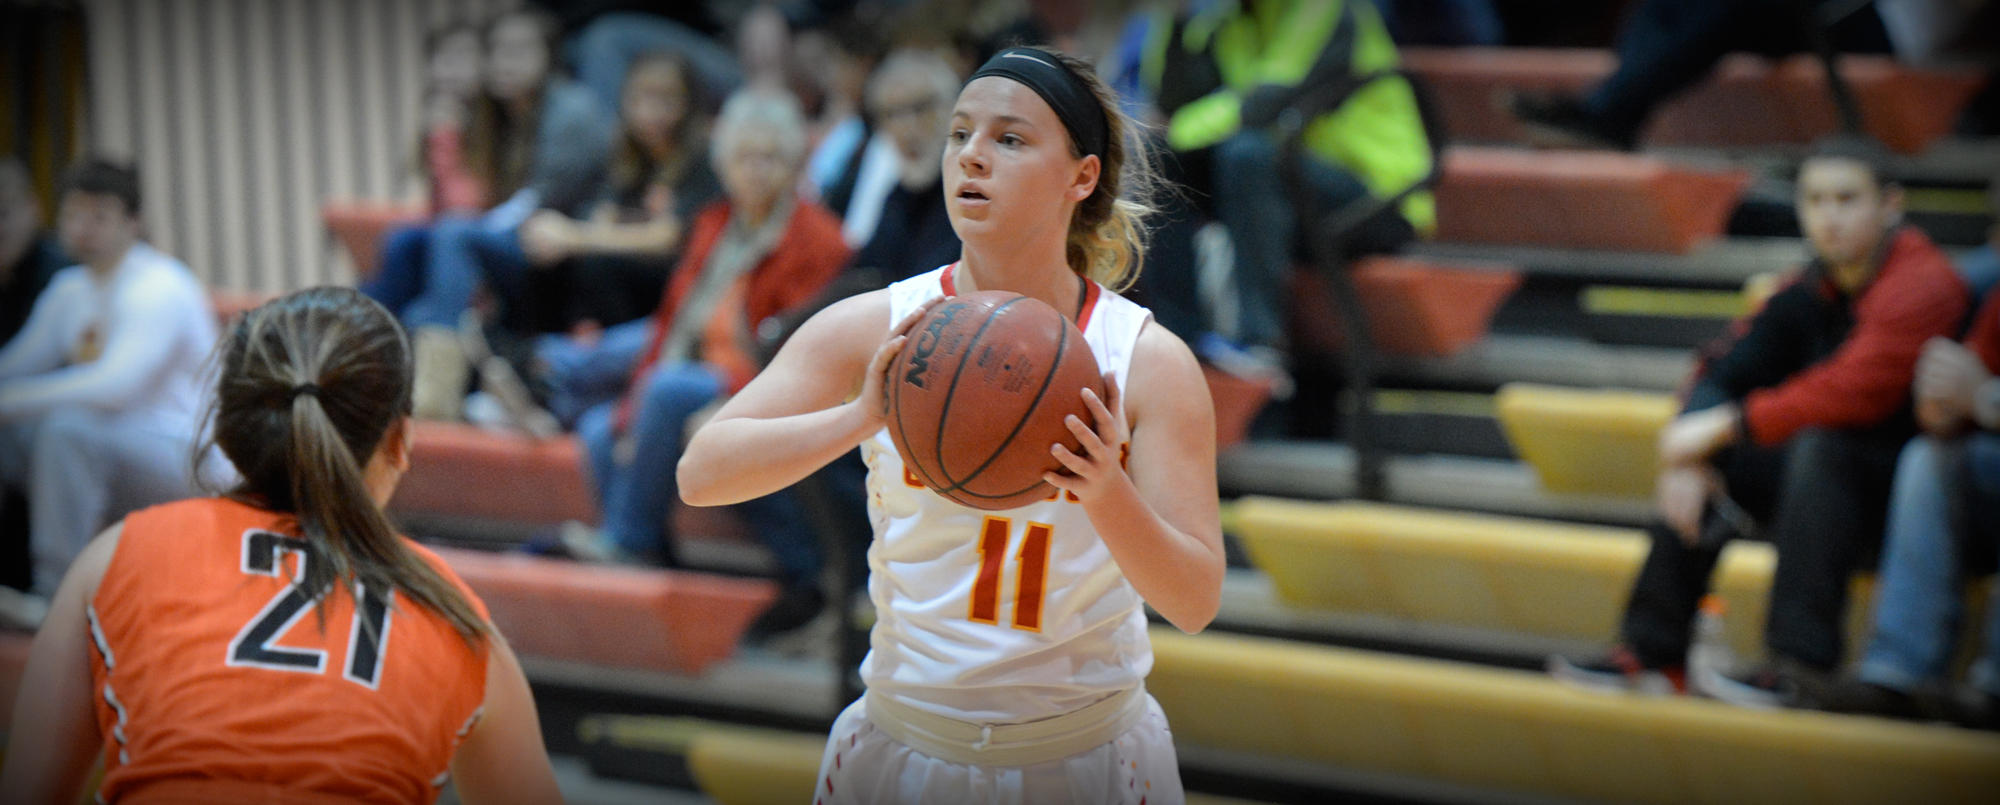 WBB Preview: Storm at Luther 12/7/16